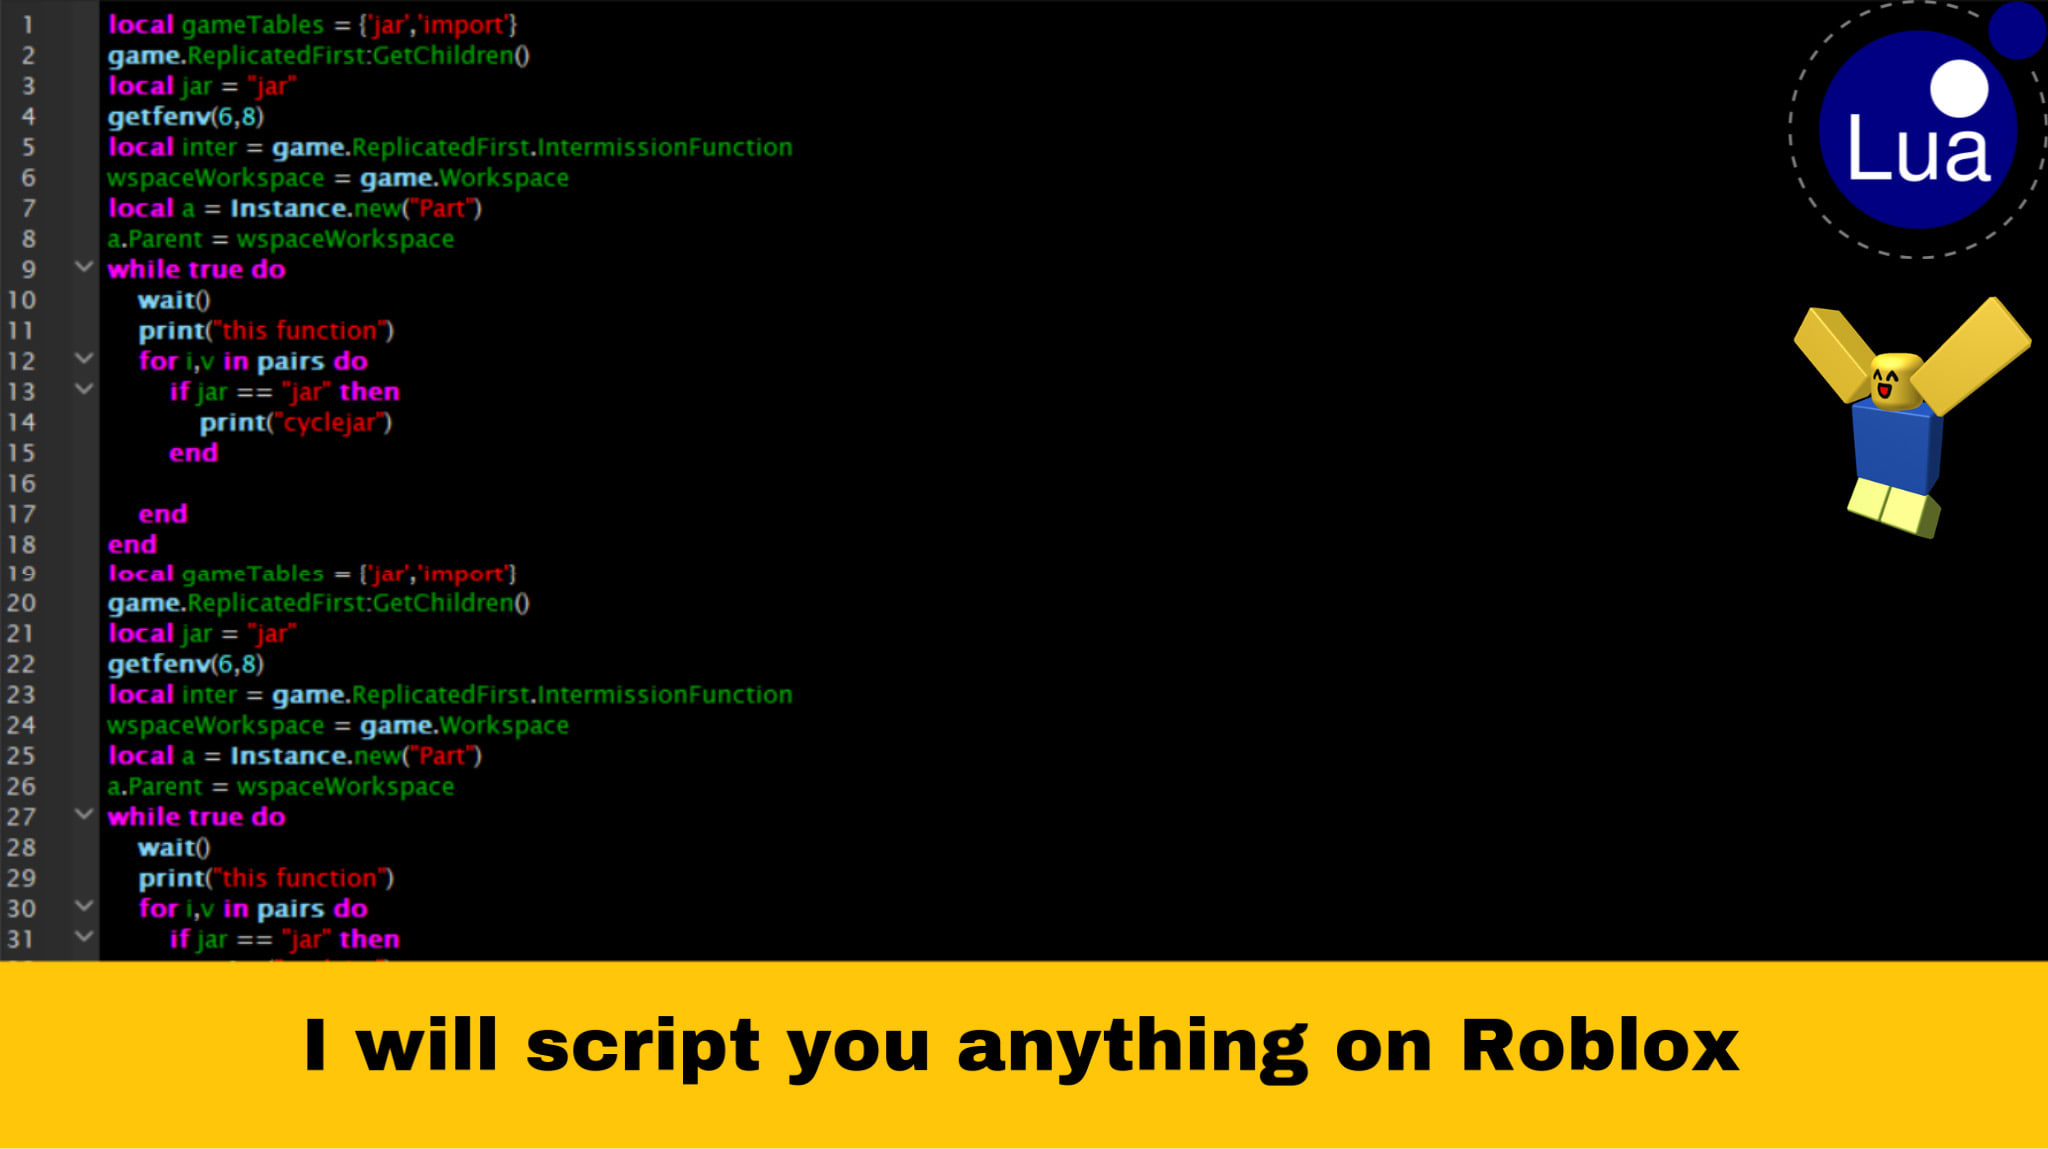 Make A Script Or A System For You On Roblox By Frepzter - script 6 roblox